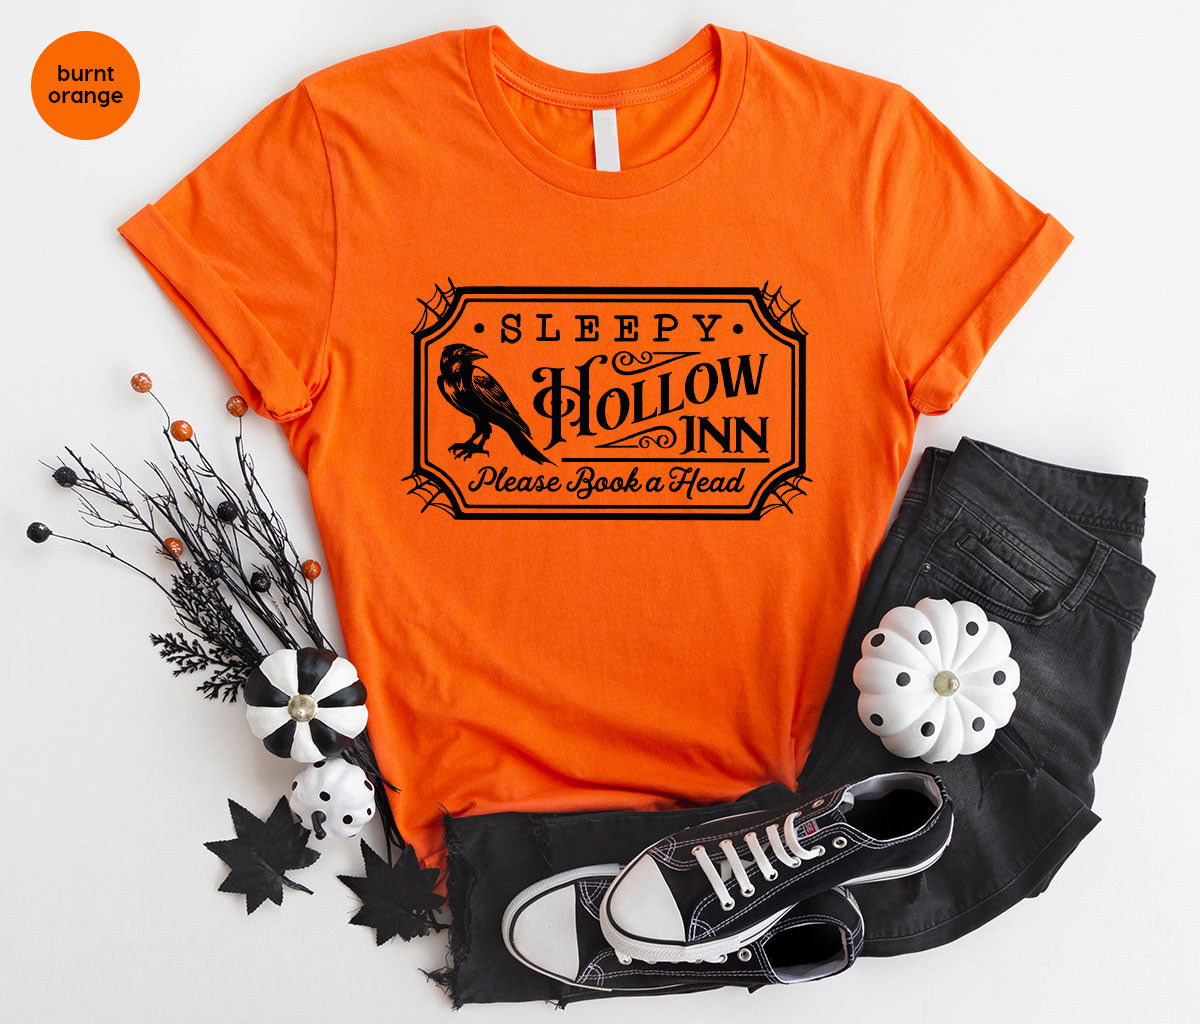 Halloween Crewneck Sweatshirt, Crow Graphic Tees, Gift for Him, Cool Movie T-Shirt, Gift for Her, Spooky Season Party VNeck Shirt